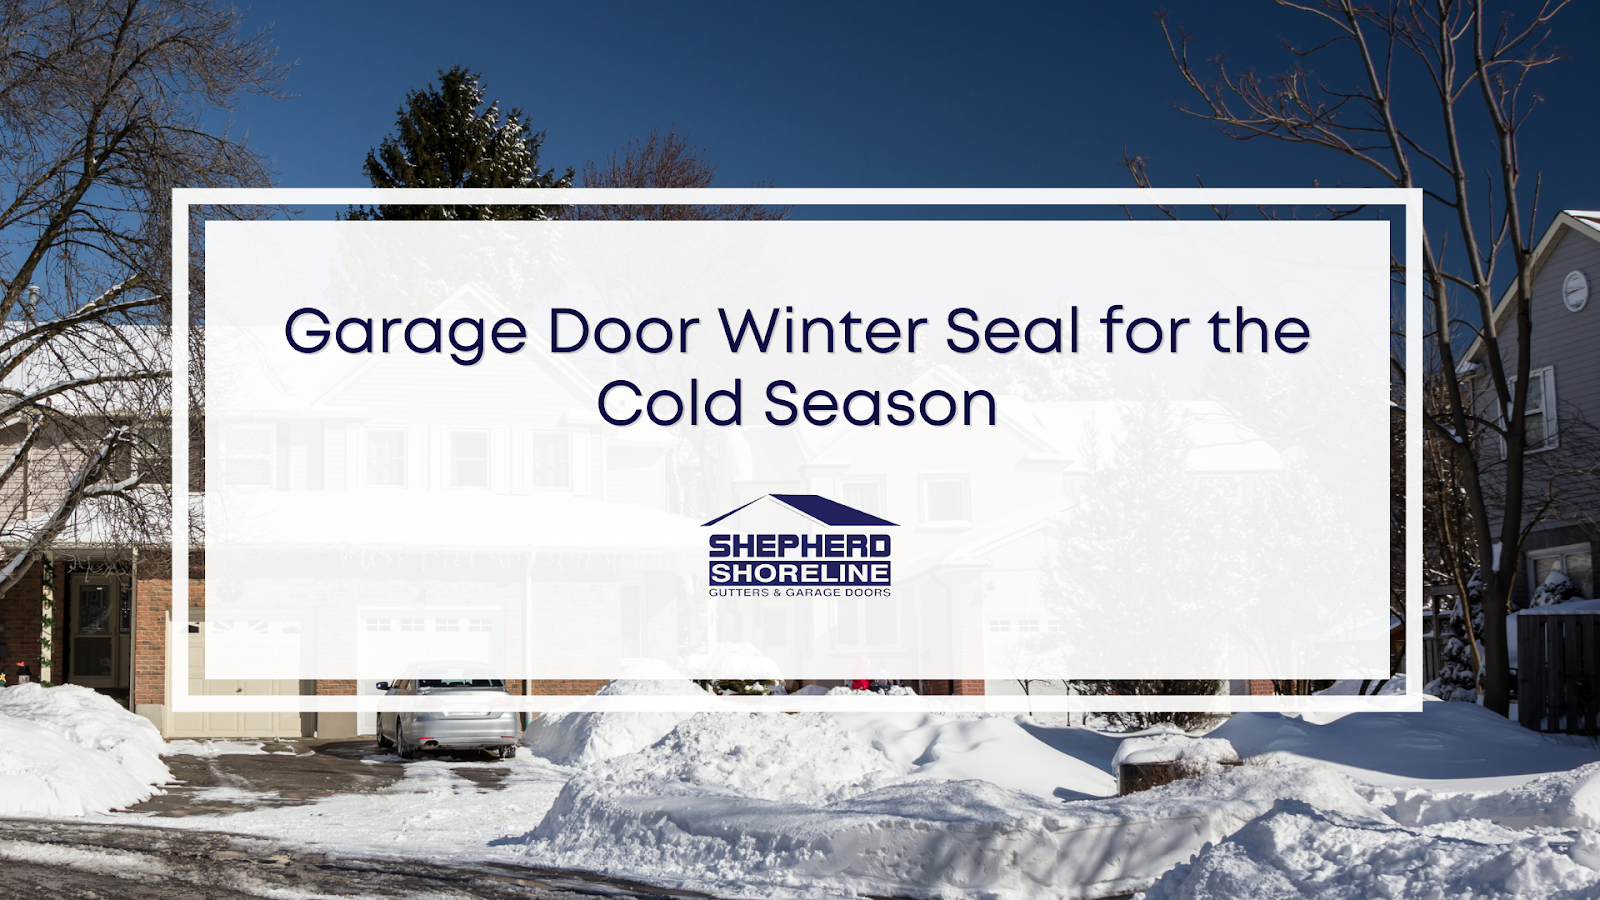 Featured image of garage door winter seal for the cold season